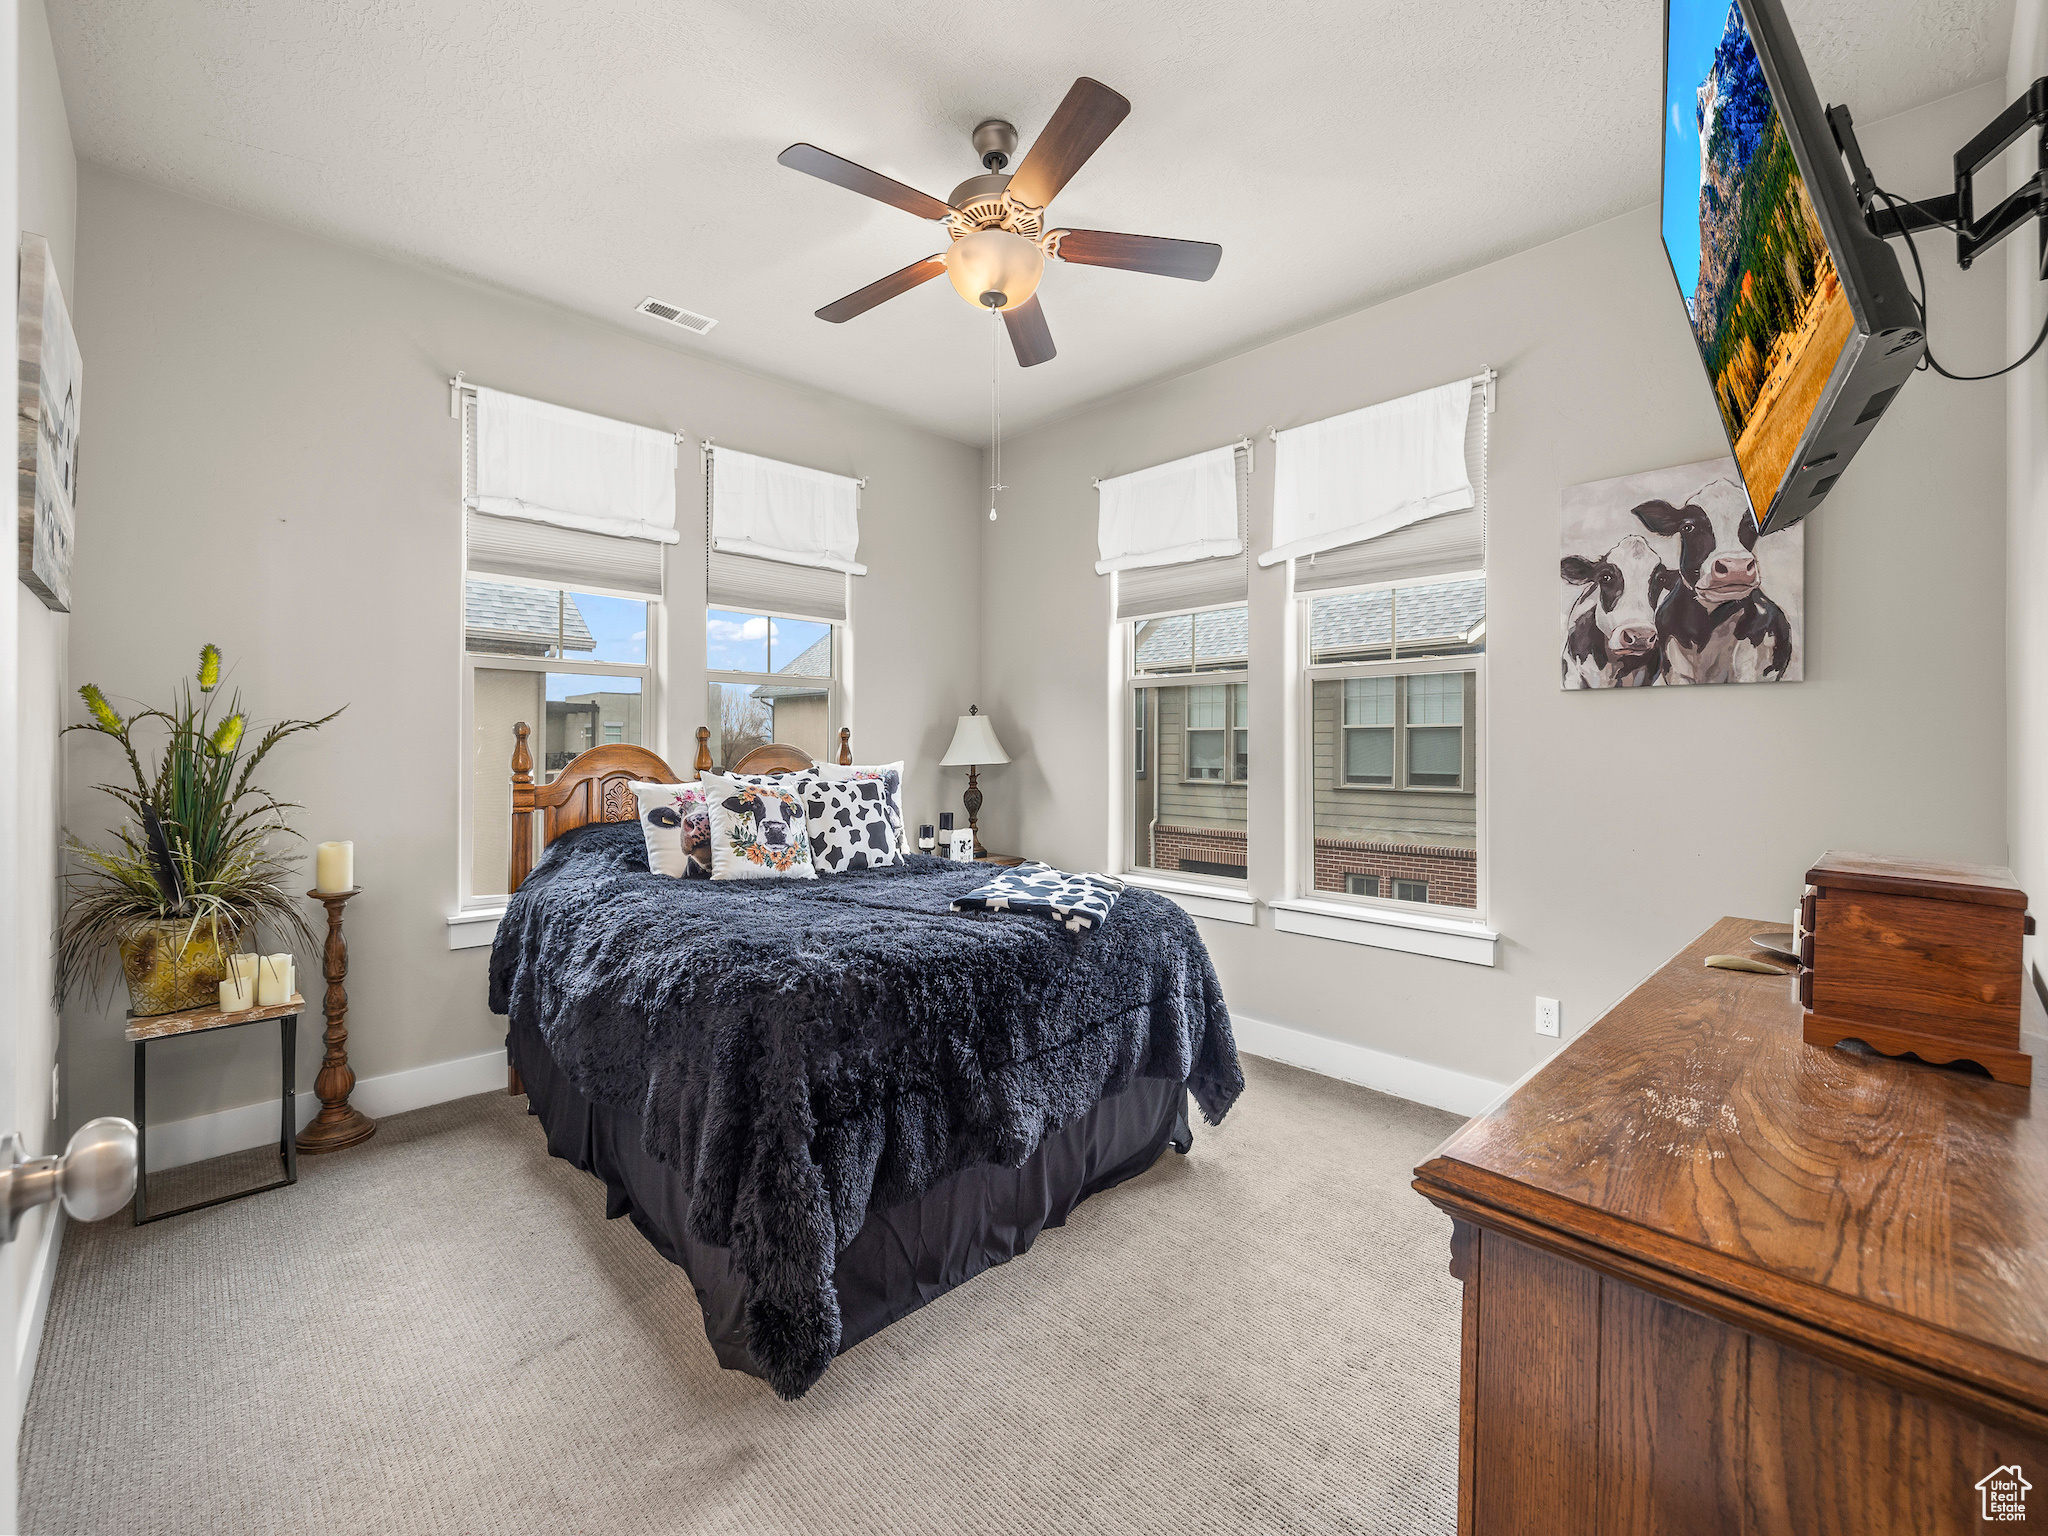 Master Bedroom, carpeted bedroom featuring ceiling fan.